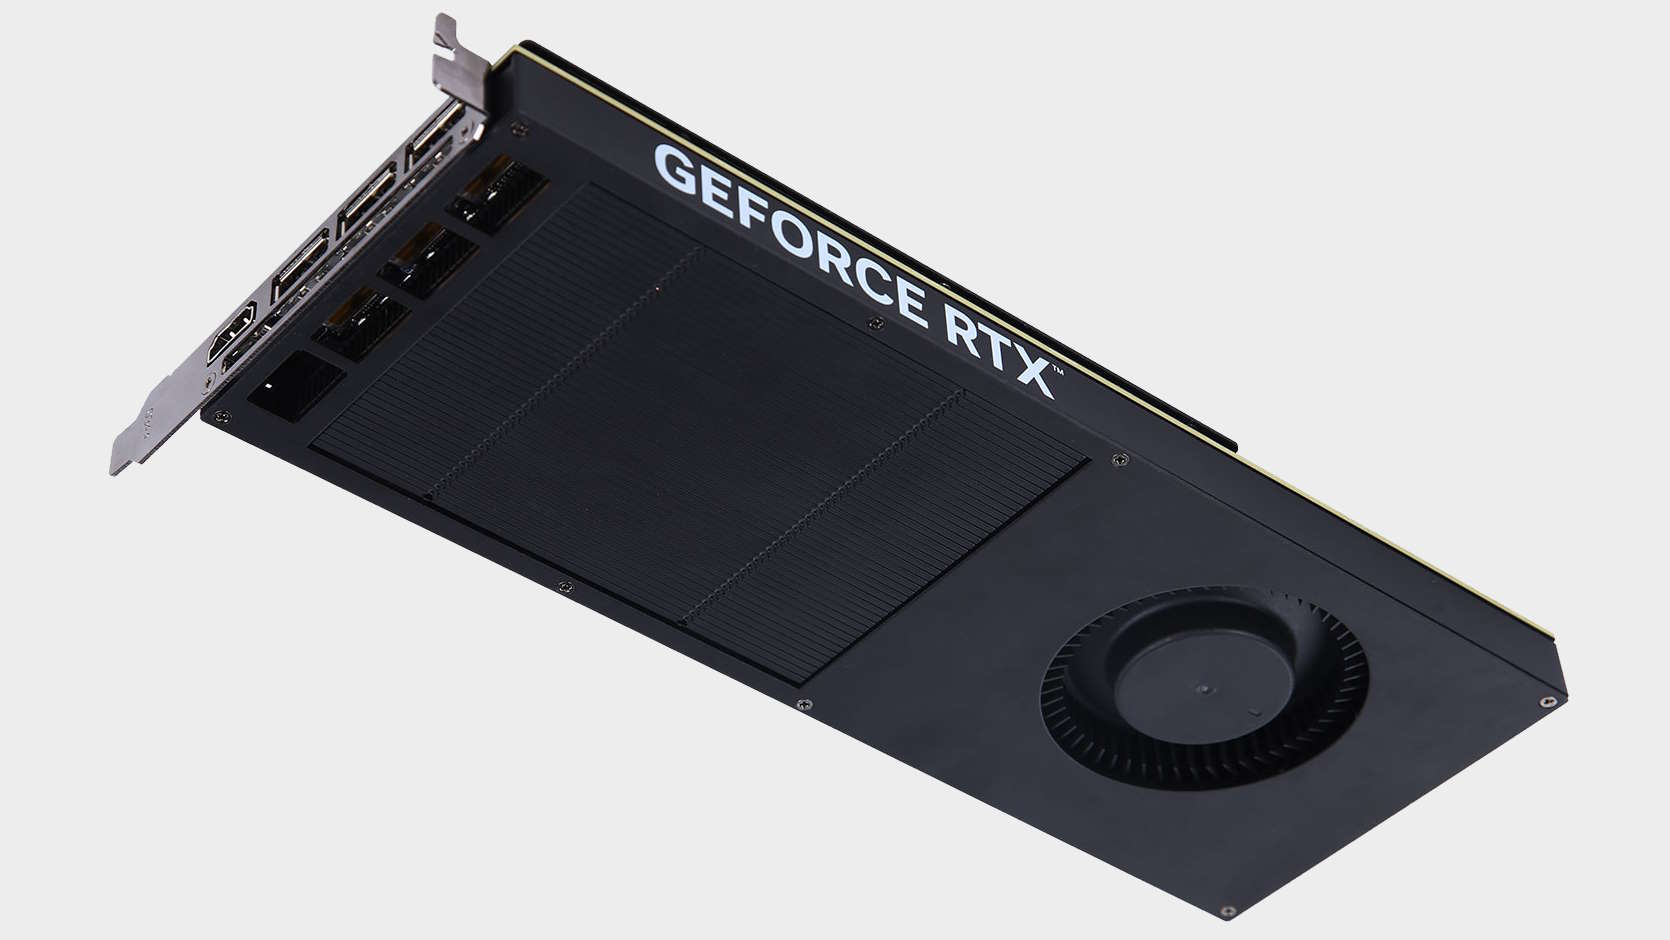 This is the spiritual successor to the best graphics card ever made